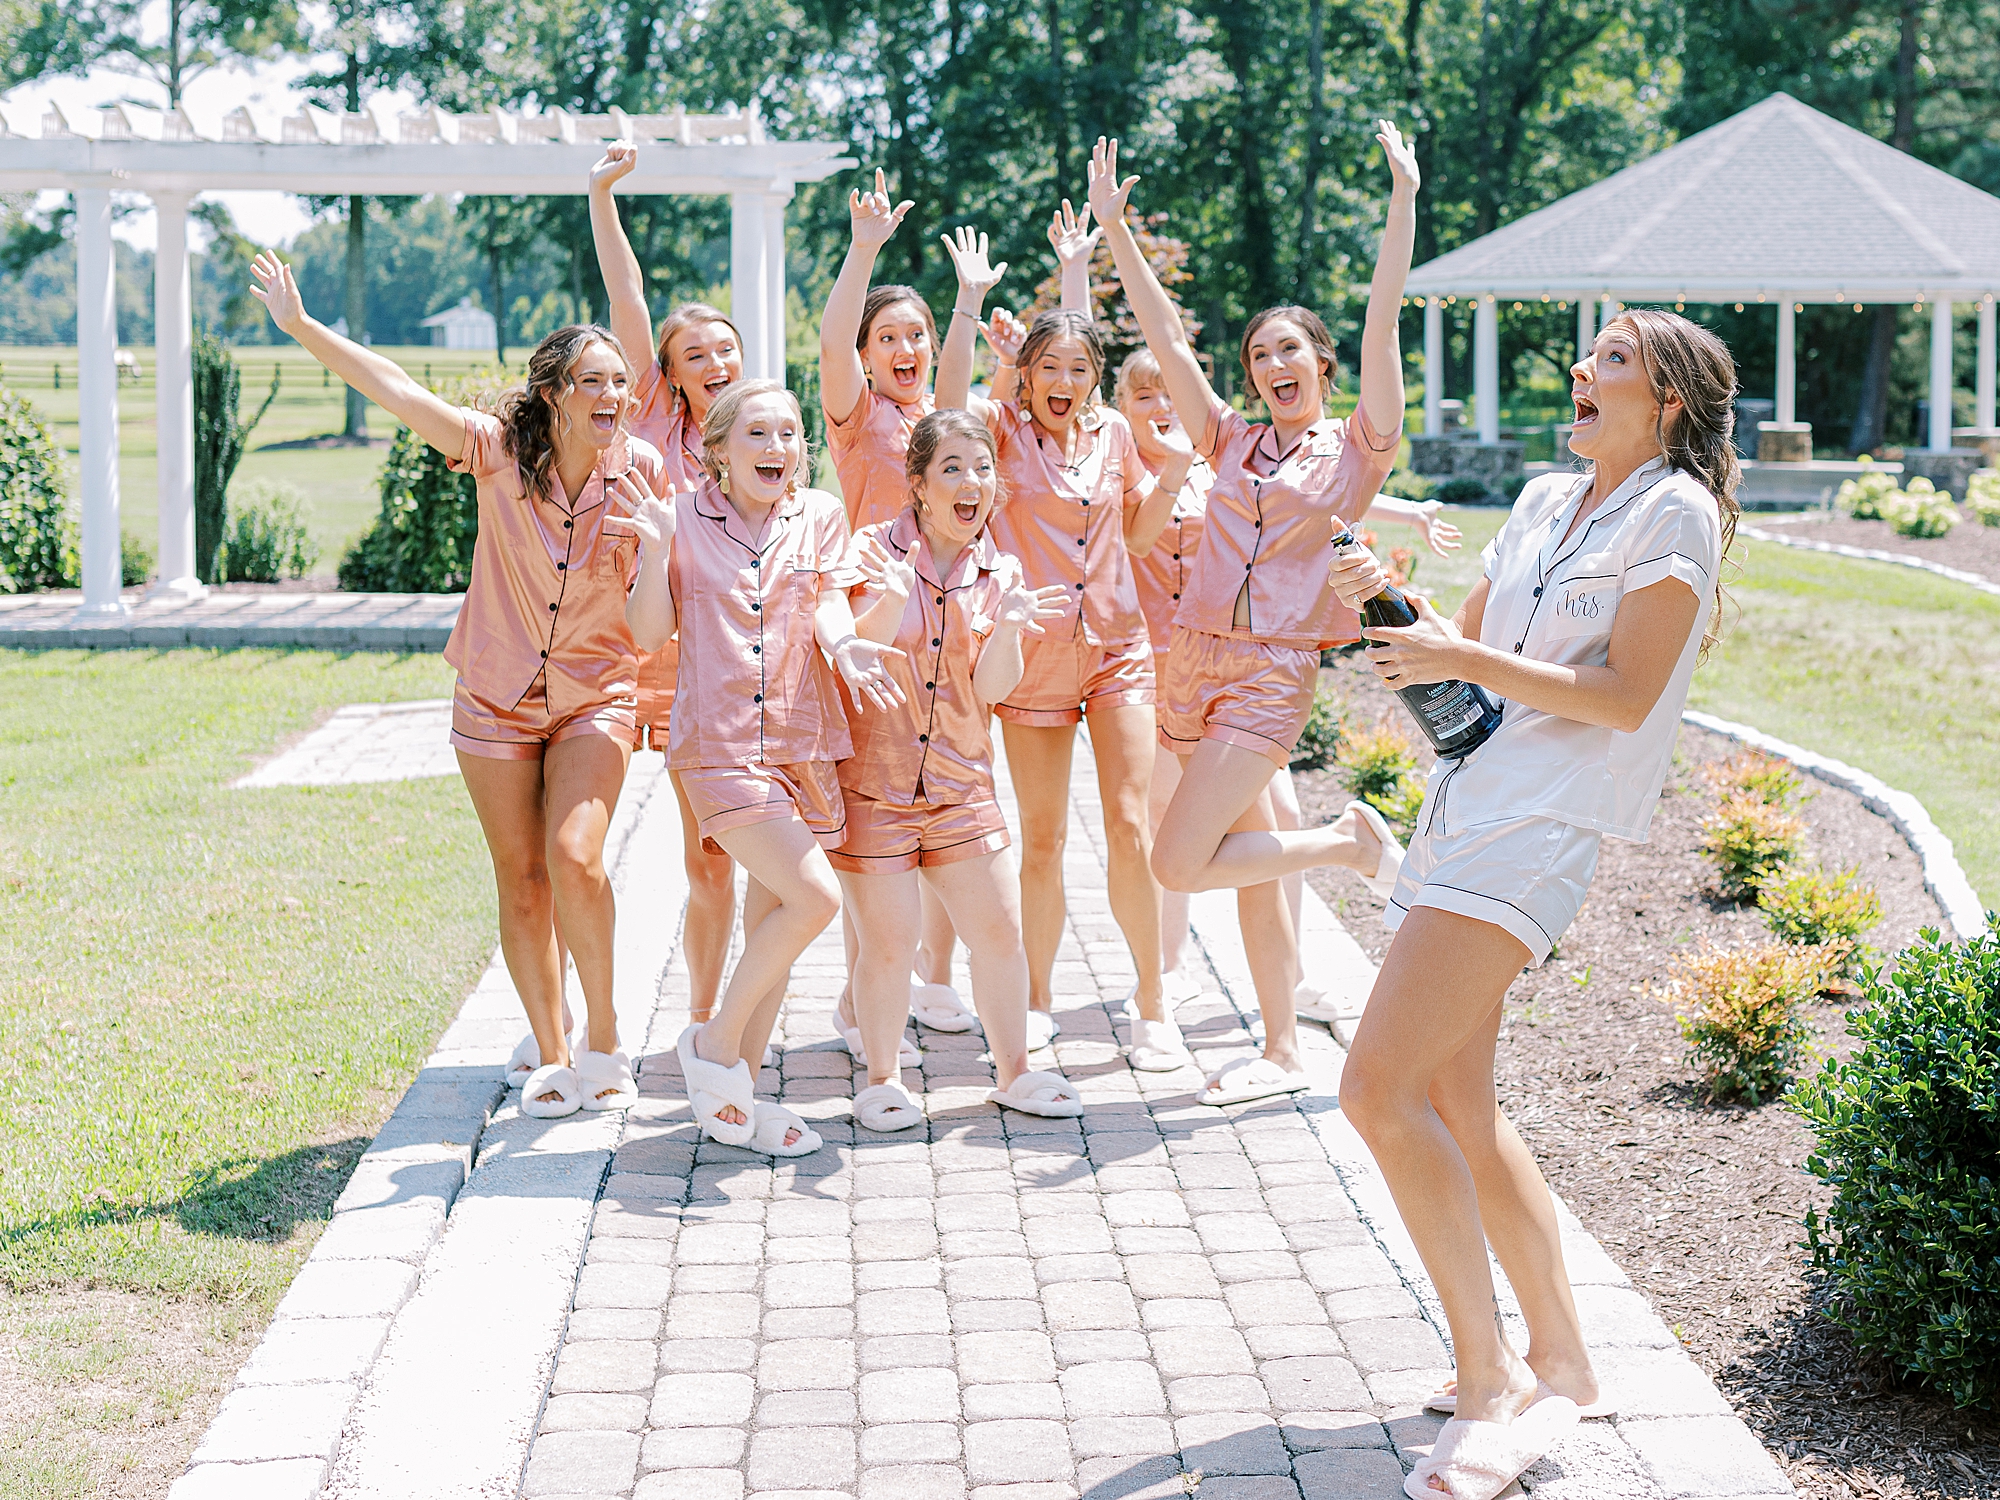 Bride popping champagne with bridesmaids in cute rose colored pajama set.